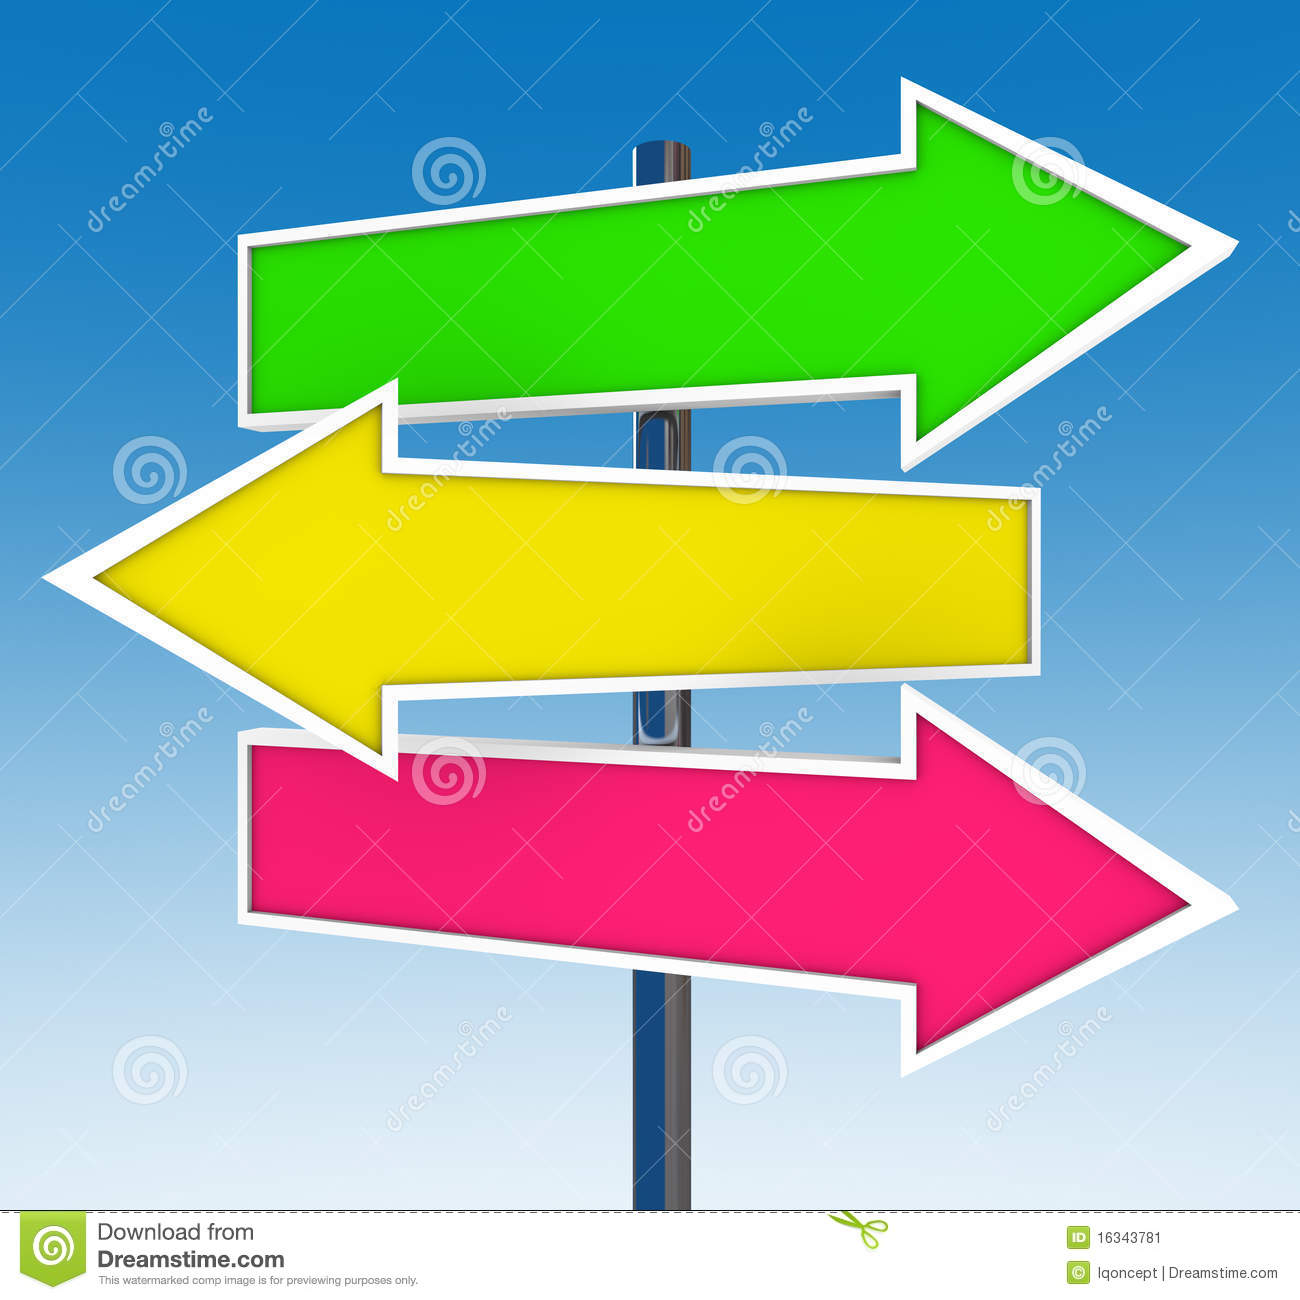     Signs   Which Option Do You Choose  Stock Image   Image  16343781